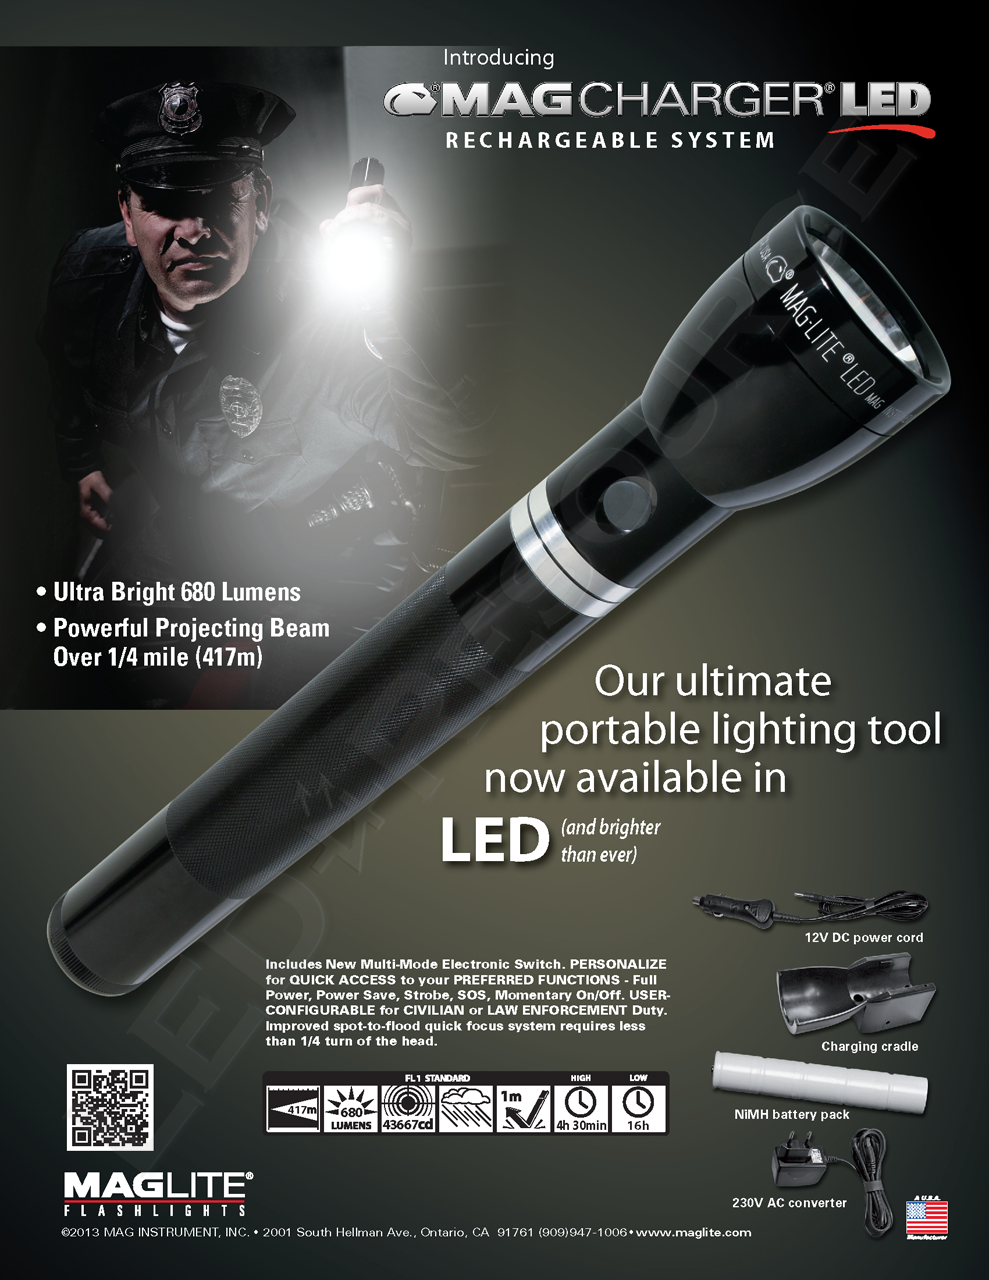 Maglite Mag Charger LED Rechargeable System